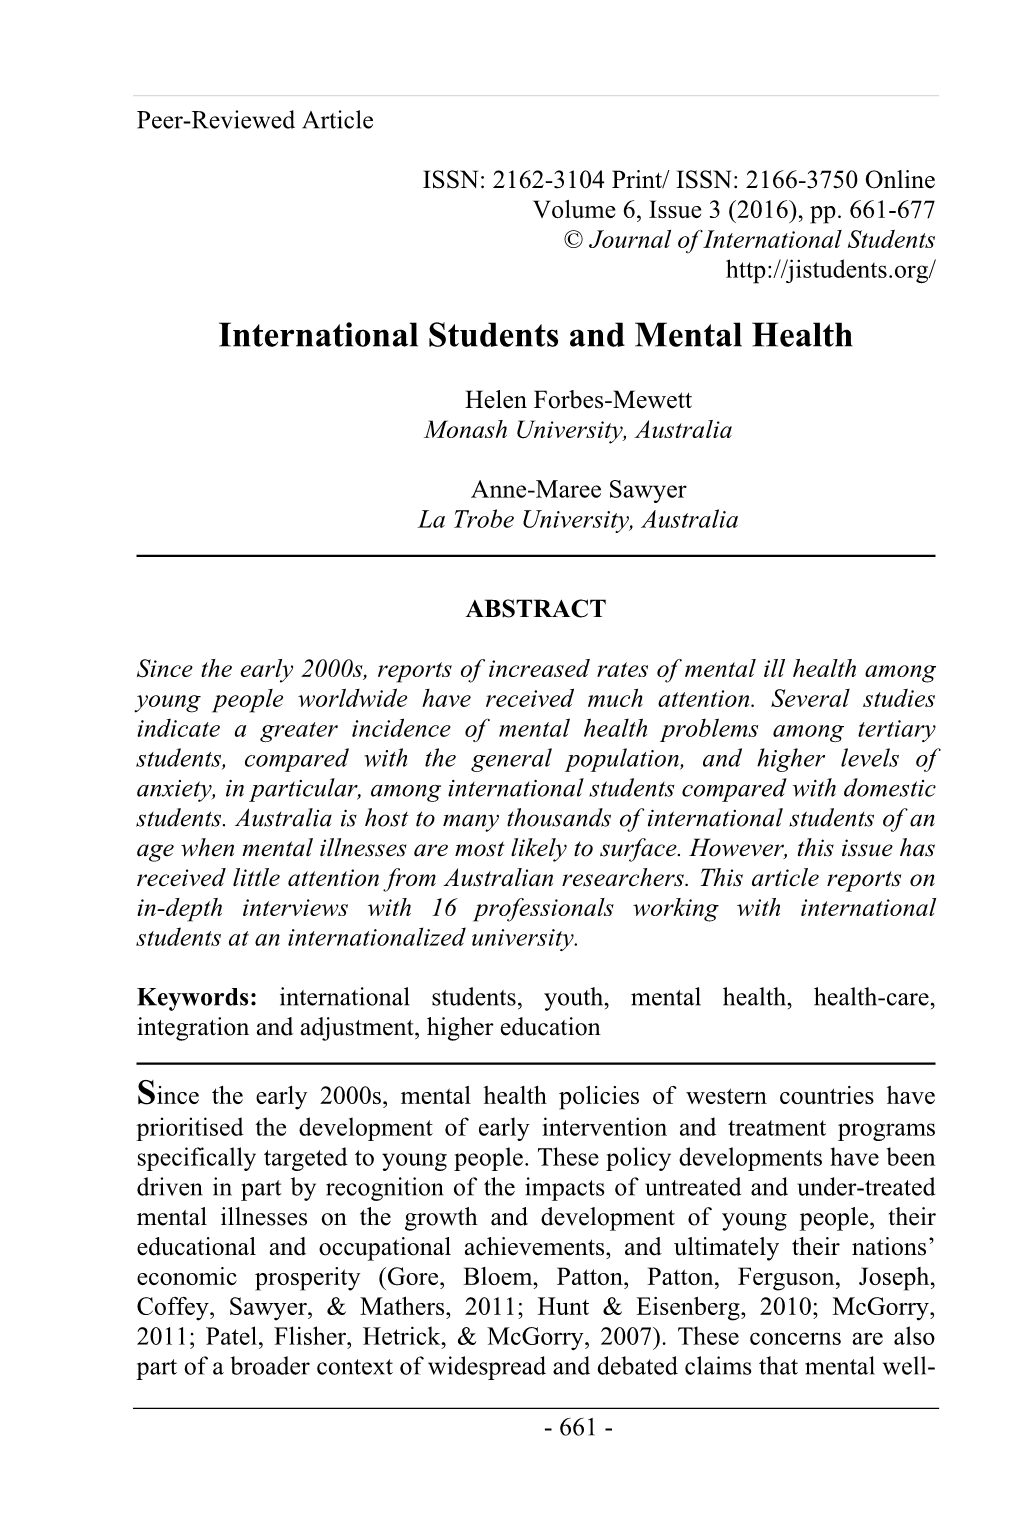 International Students and Mental Health